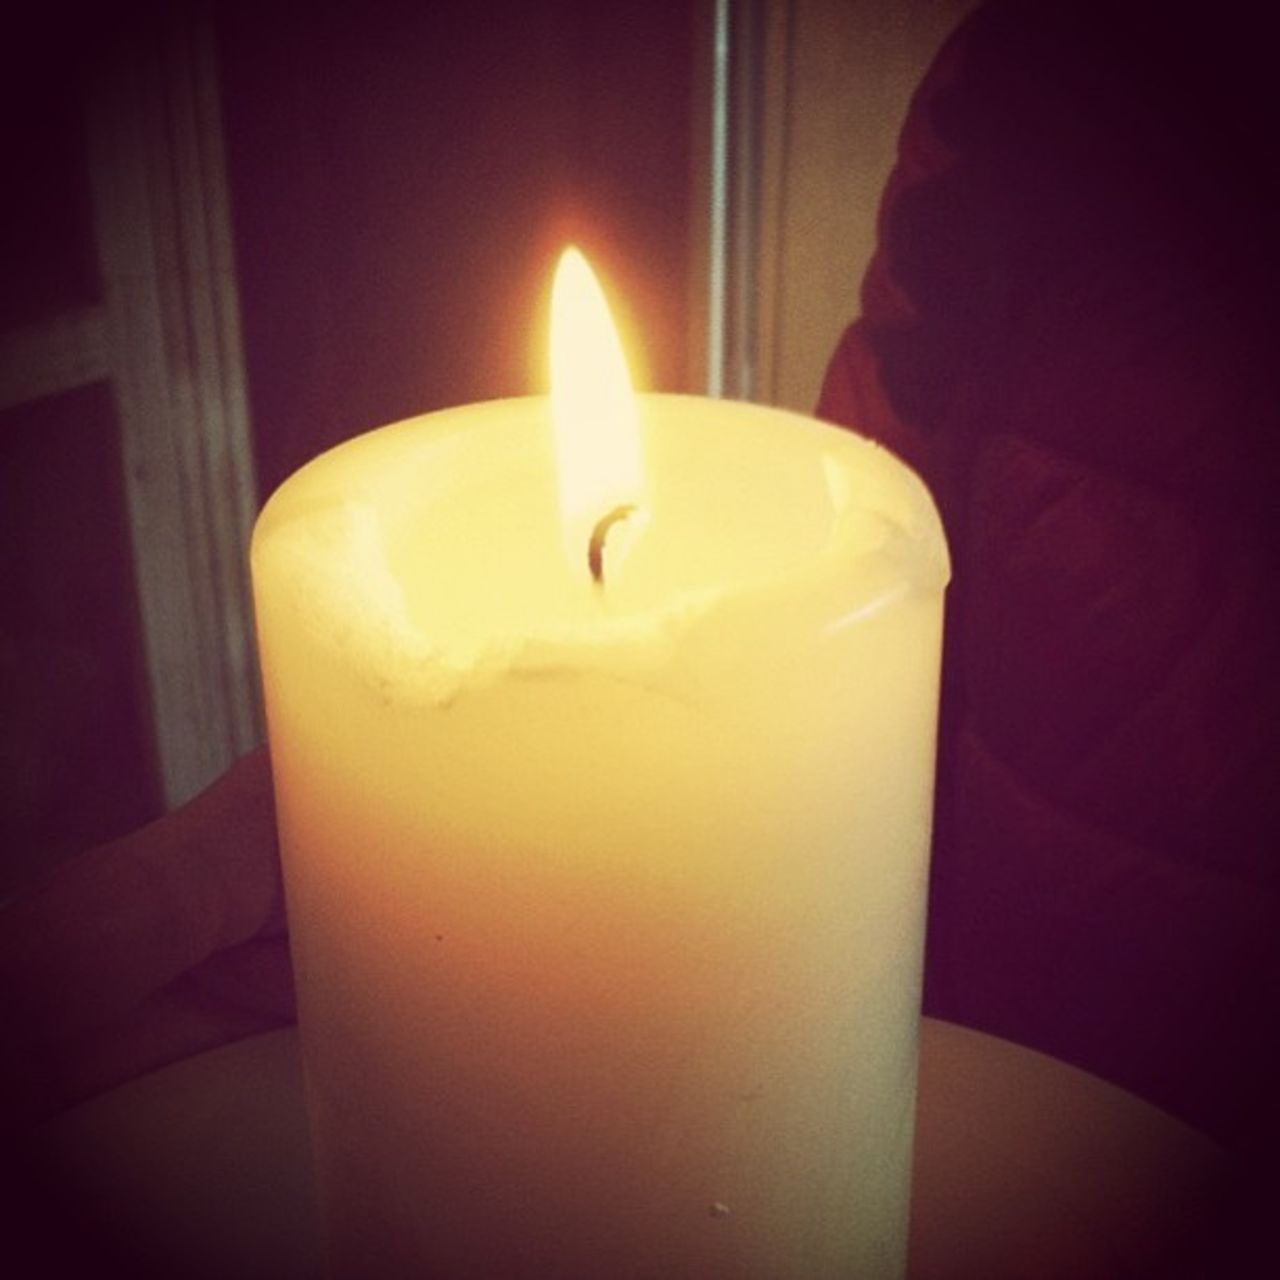 Support poured in from around the world. <a href="http://ireport.cnn.com/docs/DOC-956591">Elisa Gioia</a> lit a candle in northeastern Italy and prayed for the Boston runners.